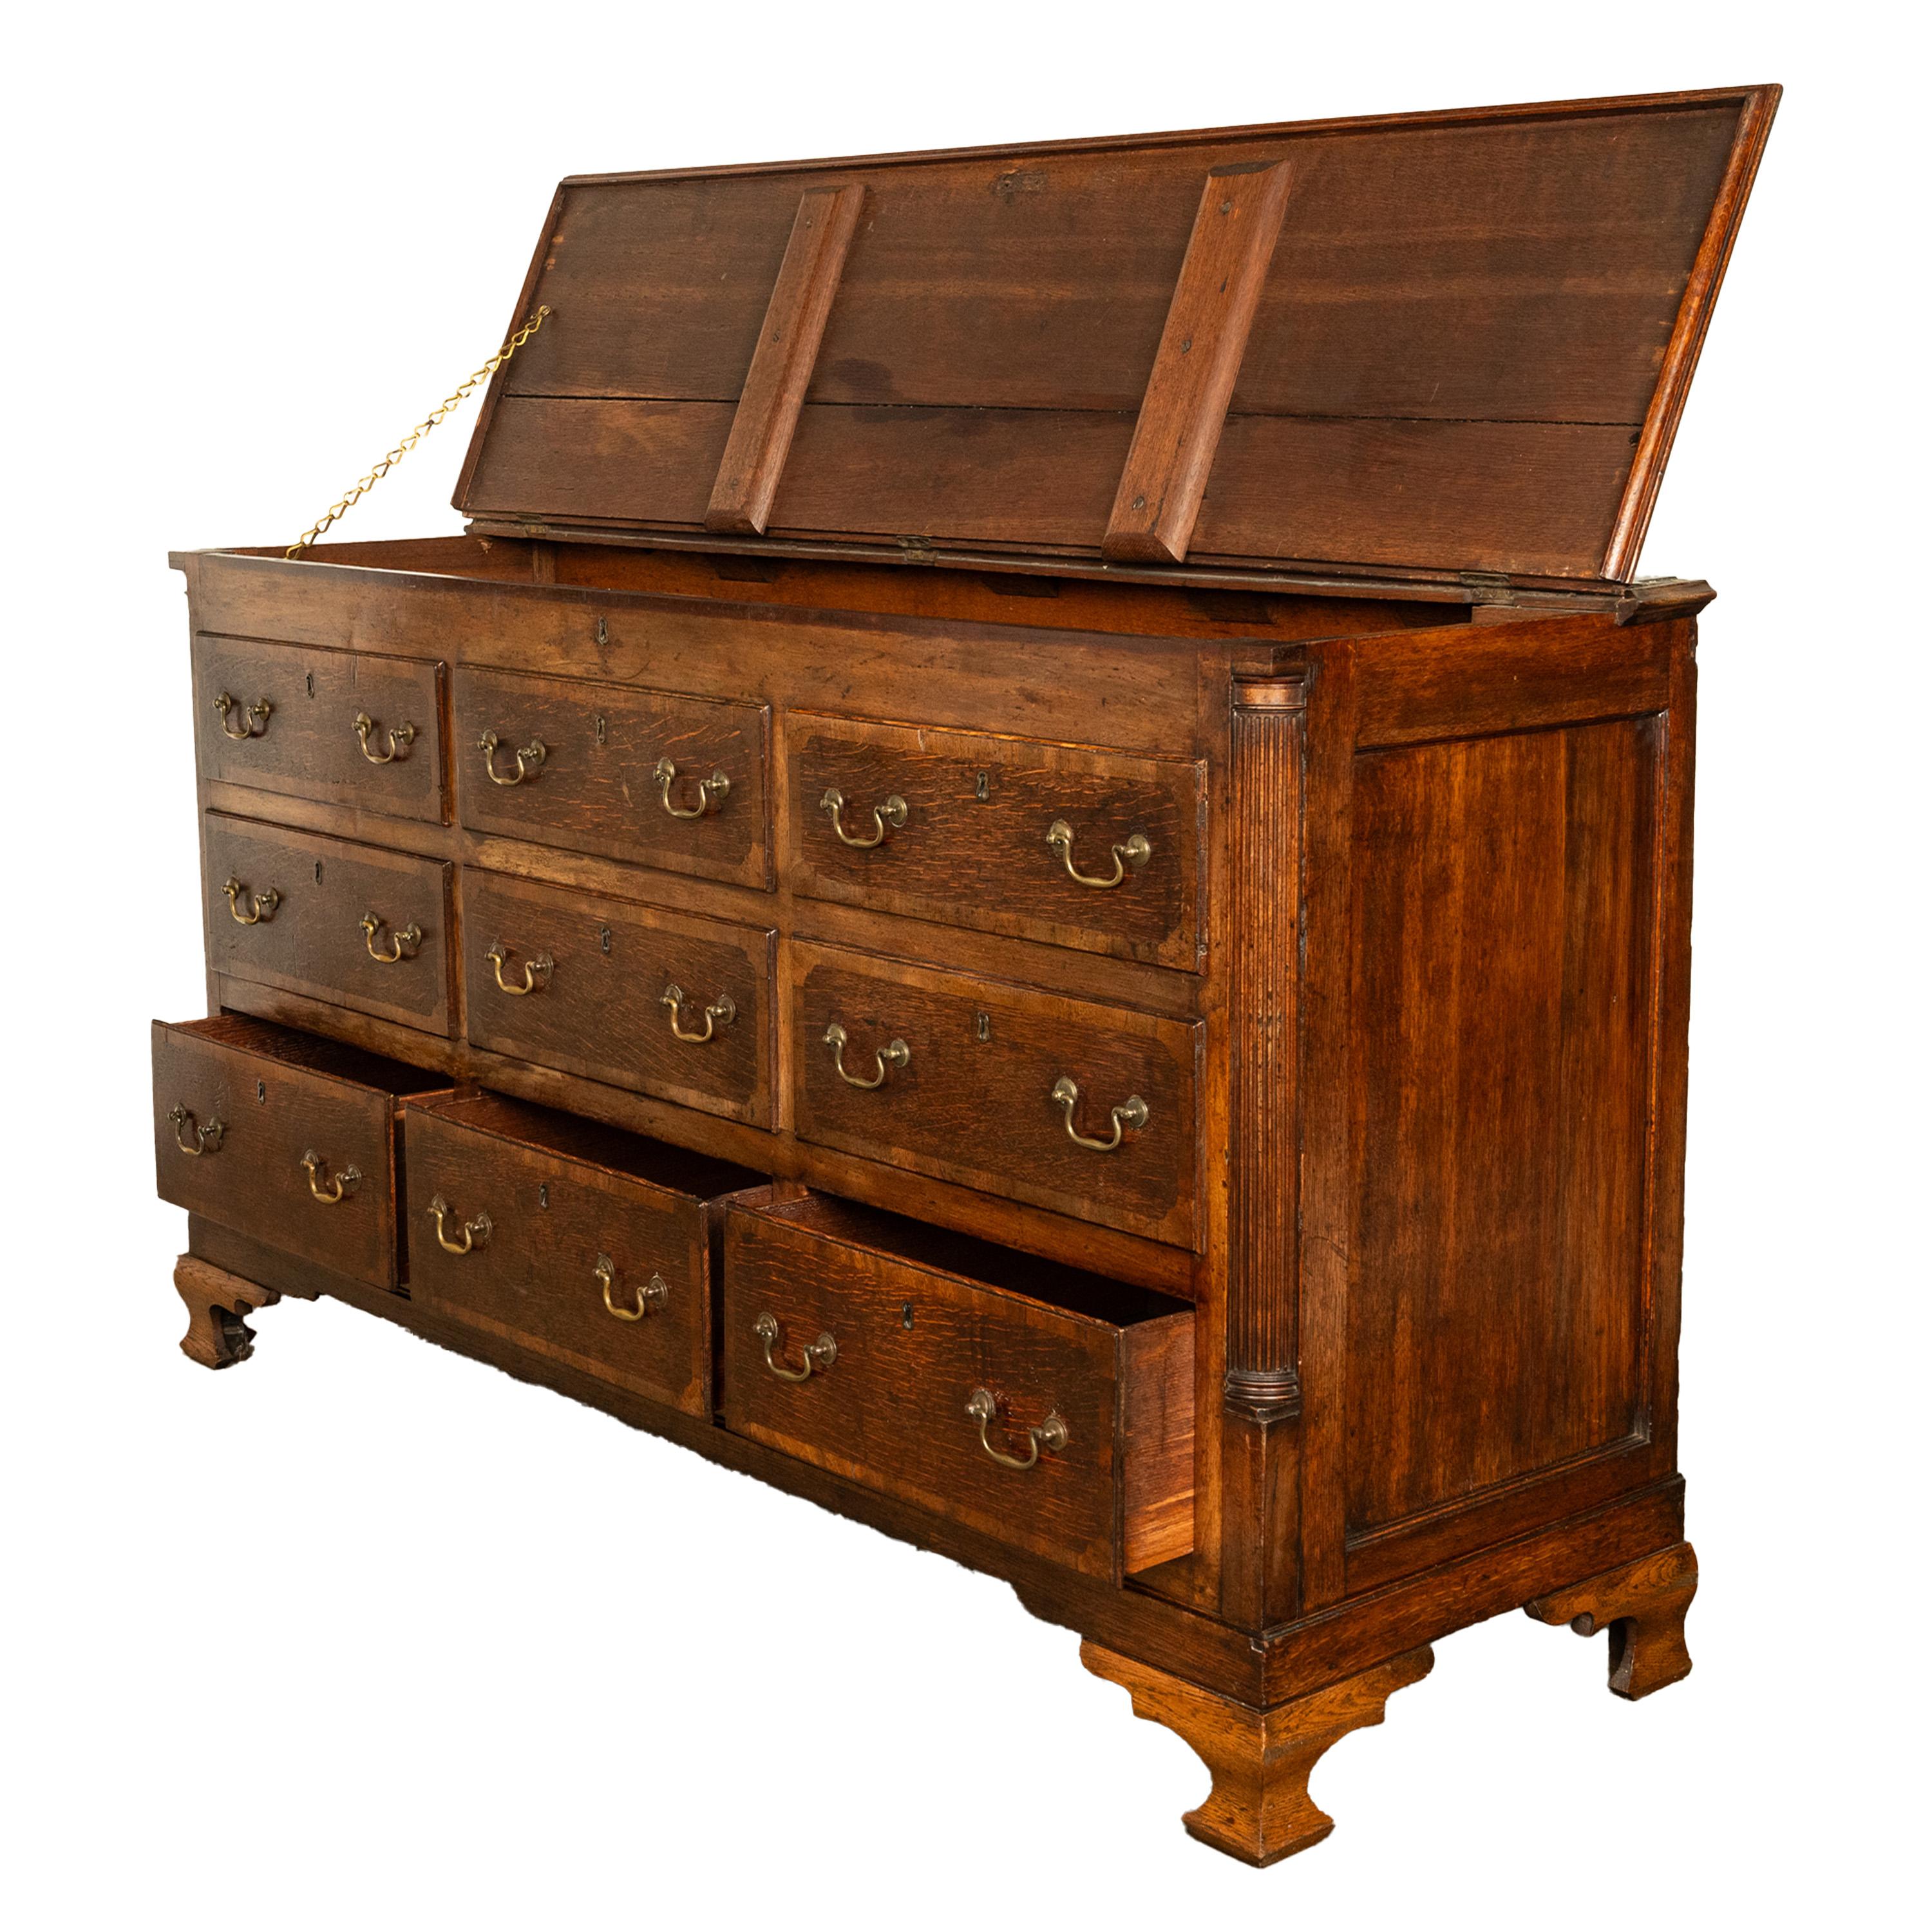 Late 18th Century Antique 18th C Georgian Oak Mahogany Hinged Top Mule Chest Coffer Sideboard 1770 For Sale